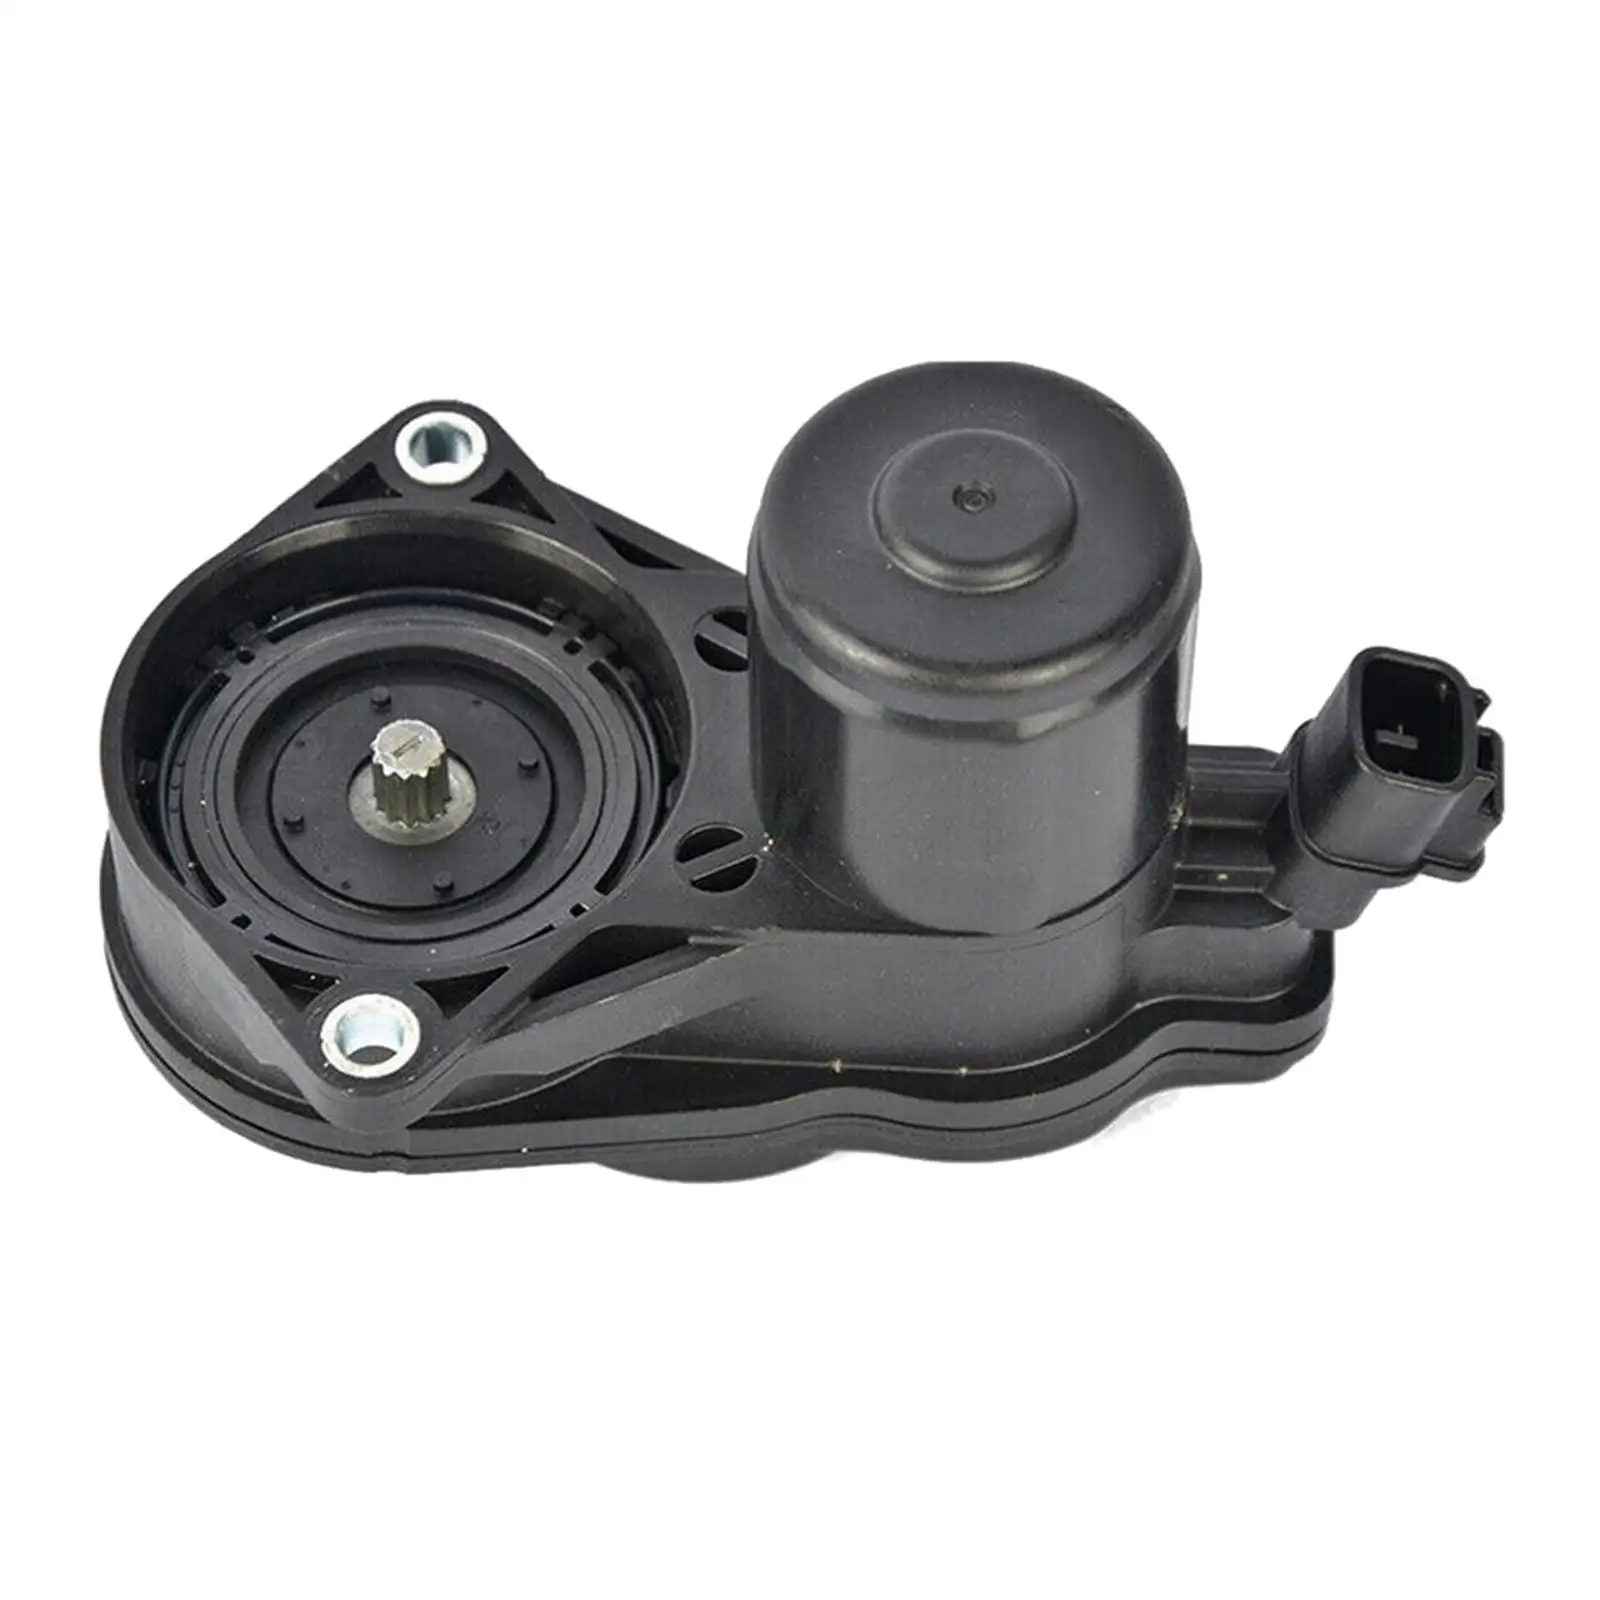 Parking Brake Actuator Car Accessories Replaces 46310-33010 for Toyota Venza Corolla Sedan for sienna Corolla Hatchback